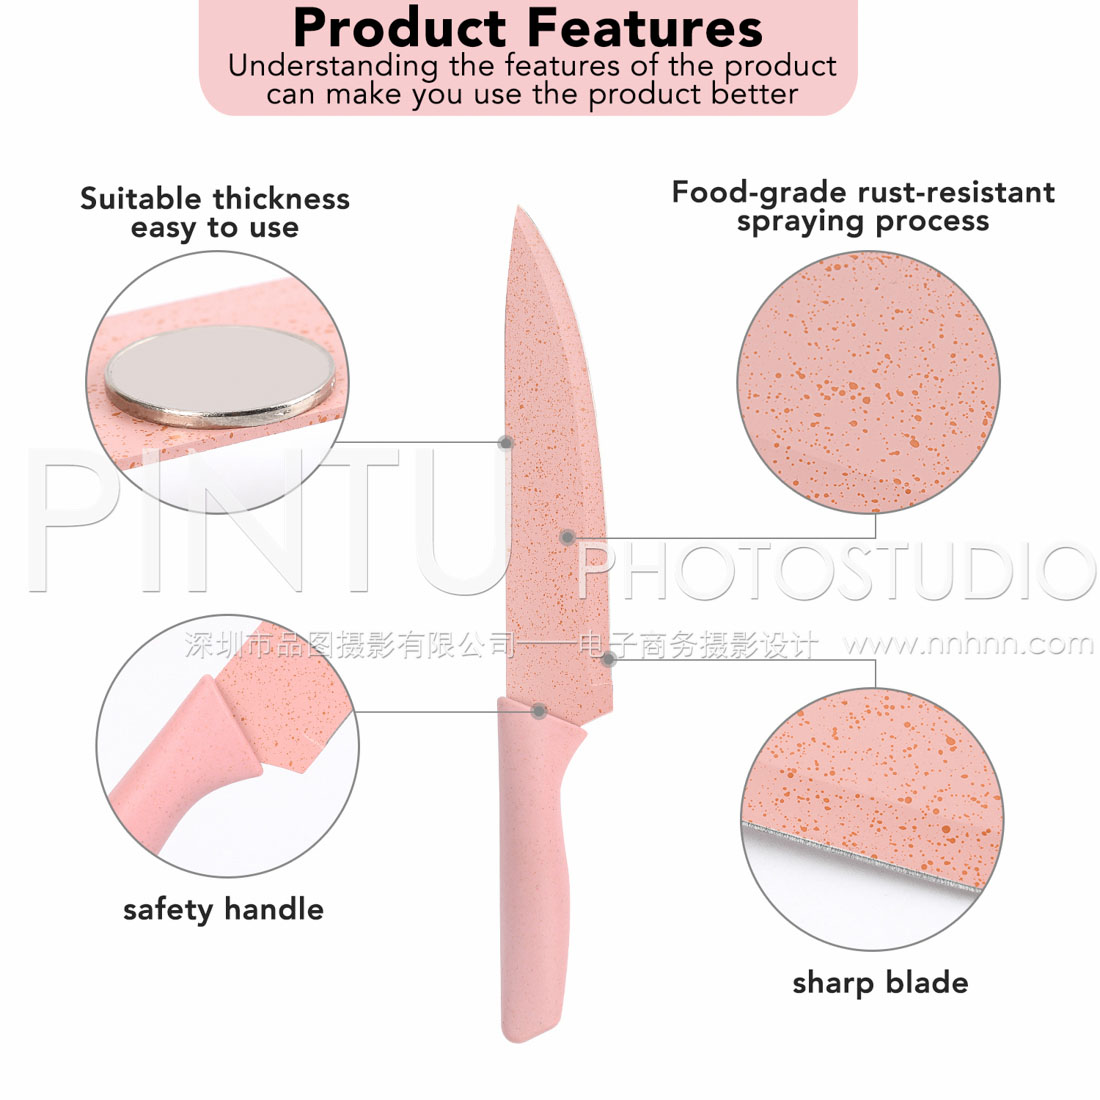 The best Amazon product photography in China Lifestyle kitchen knife Features